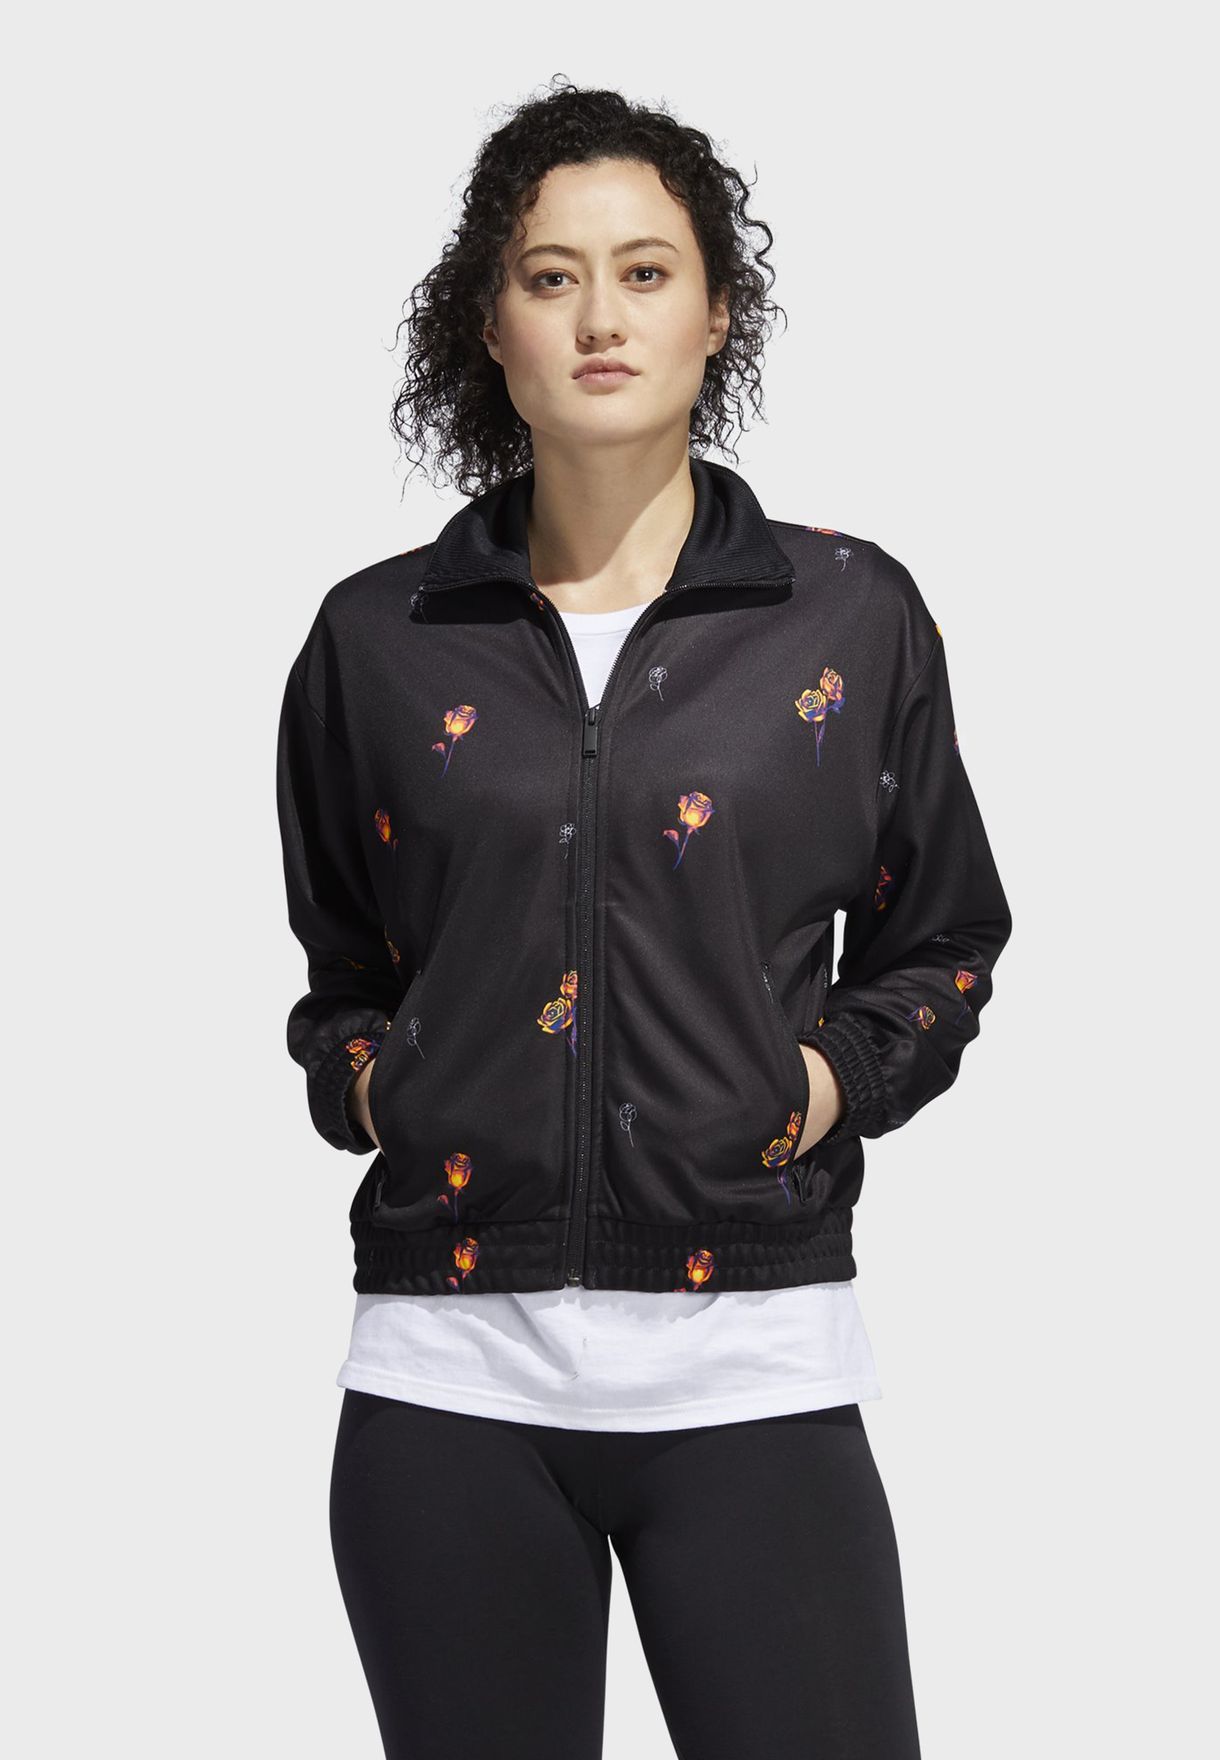 adidas track jacket womens floral